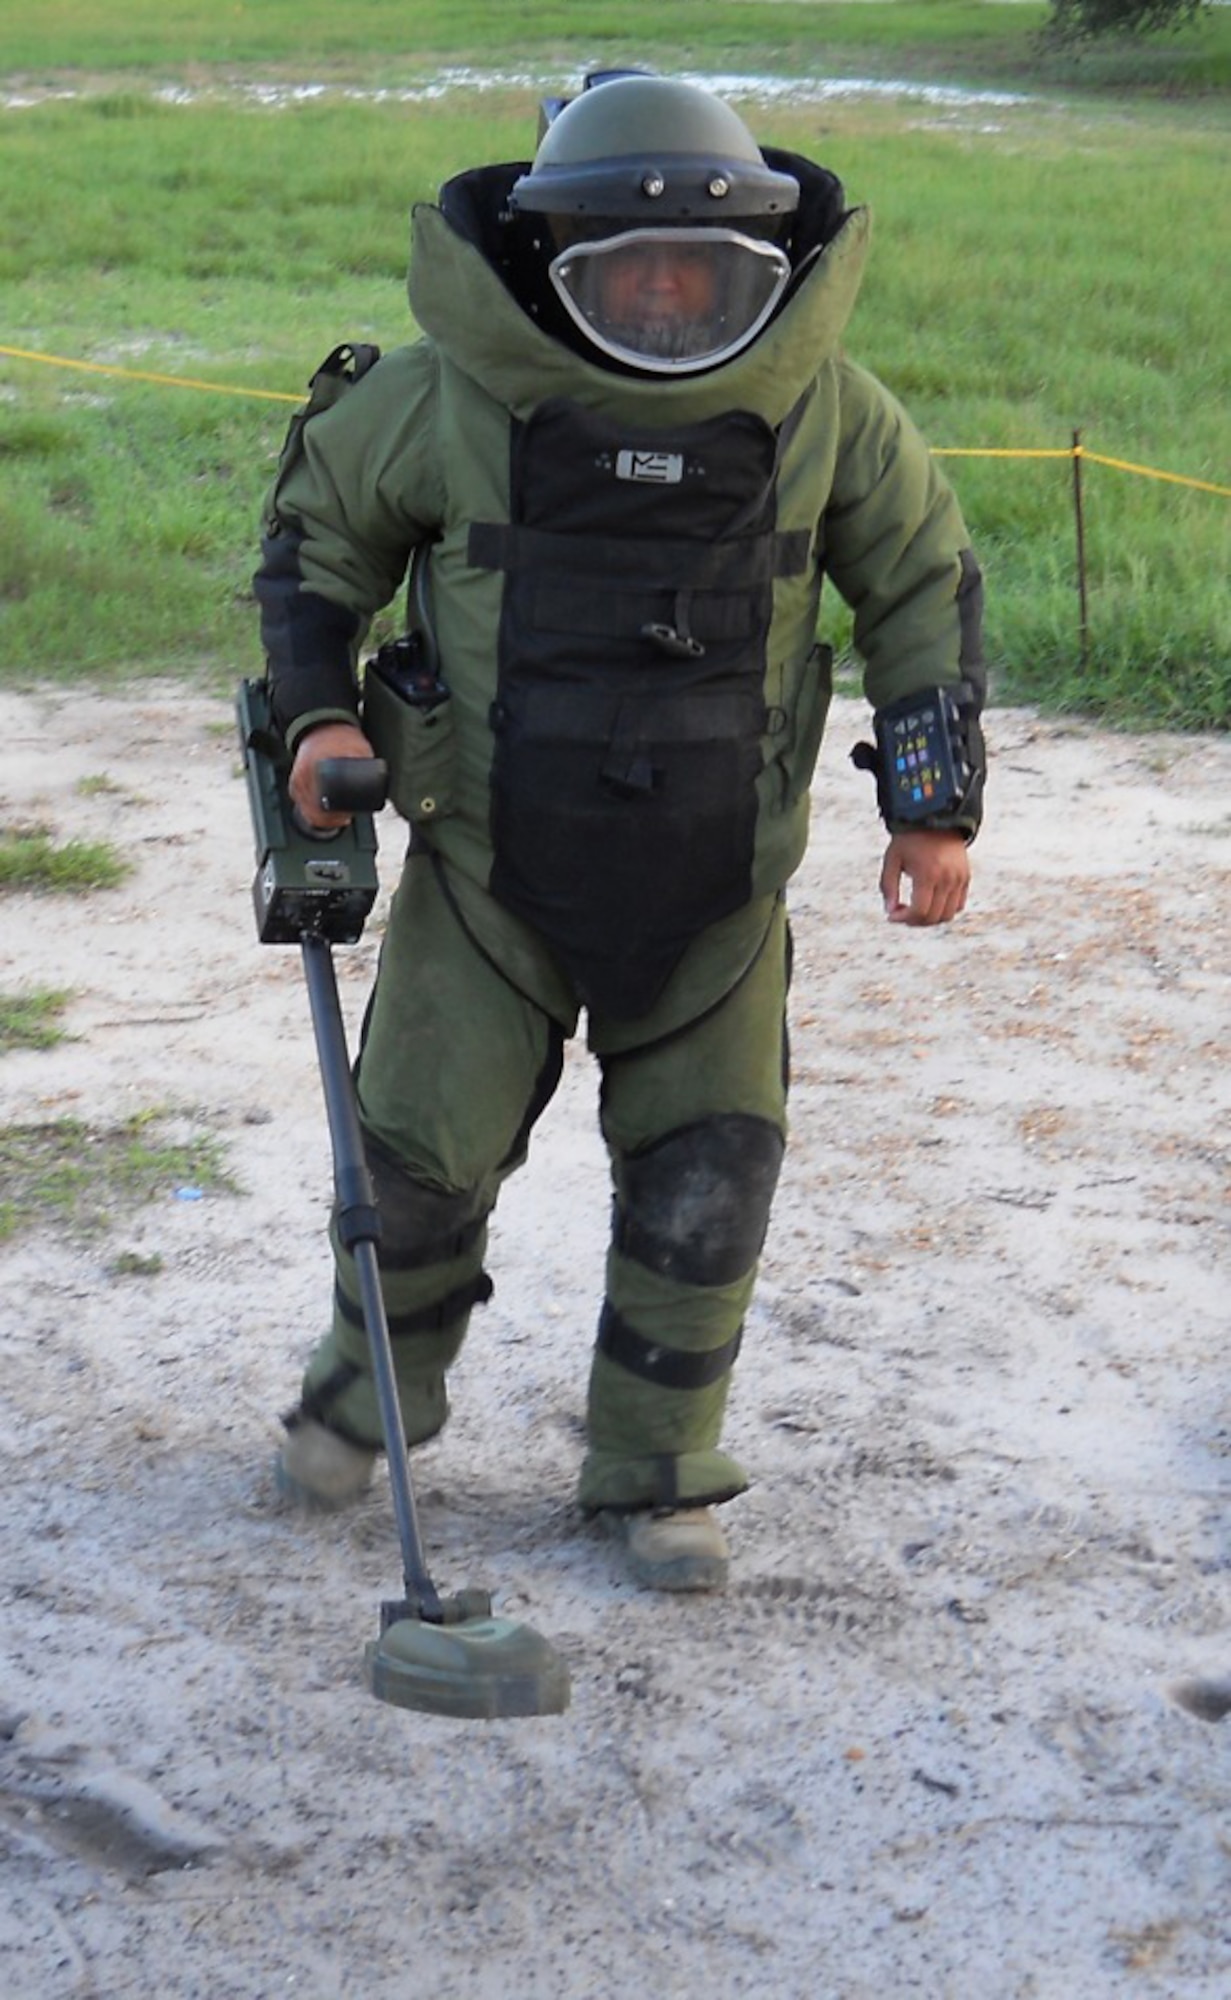 An explosive ordnance disposal member scans the soil using a Vallan "Minehound" VMR2 metal detector during an operational utility event at the Naval Surface Warfare Center in Panama City, Fla. The detector uses ground penetrating radar to locate low to non-metallic mines that can elude traditional metal detectors. The Counter-Improvised Explosive Device Branch -- a Life Cycle Management Center team based out of Hanscom Air Force Base, Mass. -- was respnosible for equipping 36 deployed Air Force EOD teams with the latest handheld detectors. (U.S. Air Force photo by Donald MacMillan) 